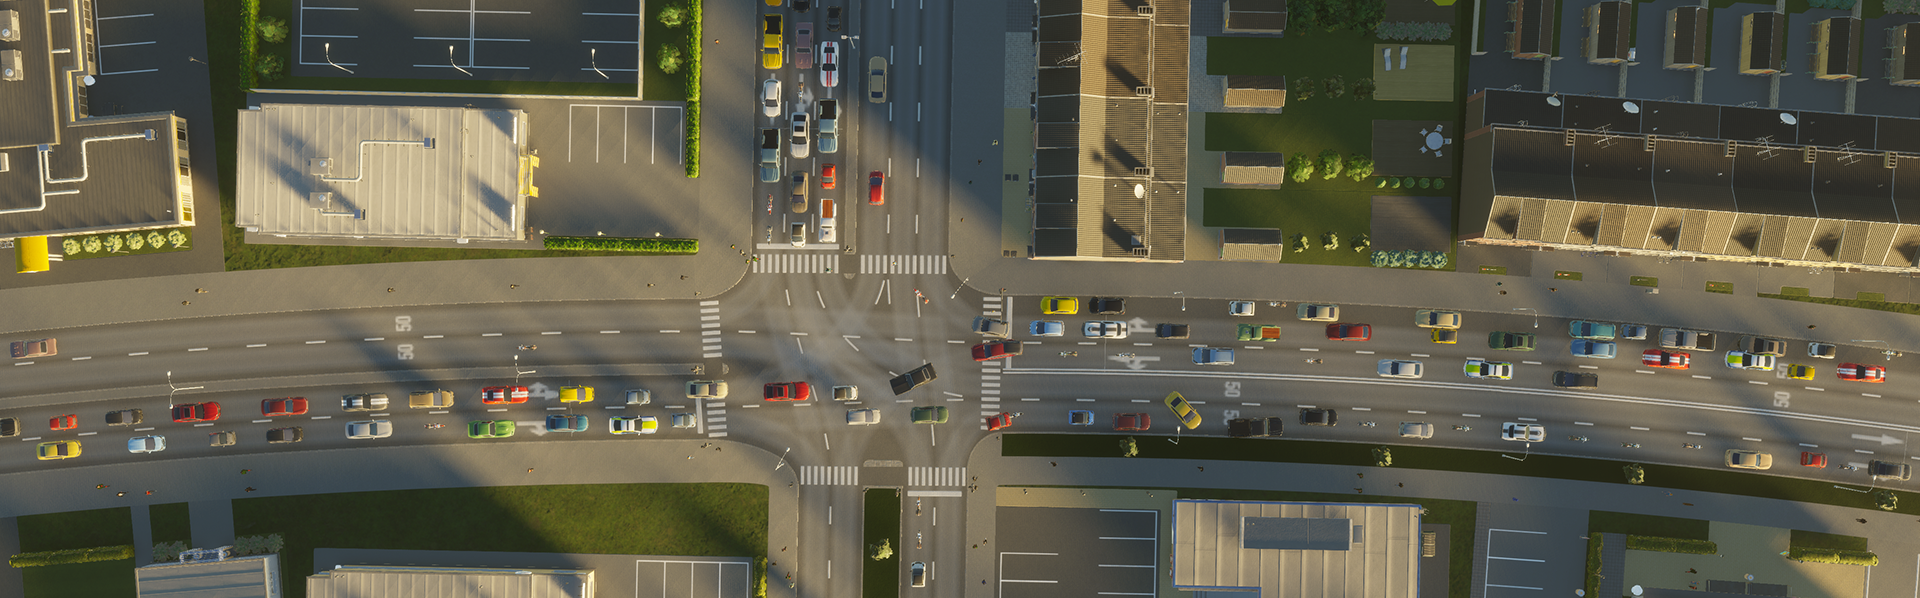 Huge new Cities Skylines 2 mod completely transforms the whole economy